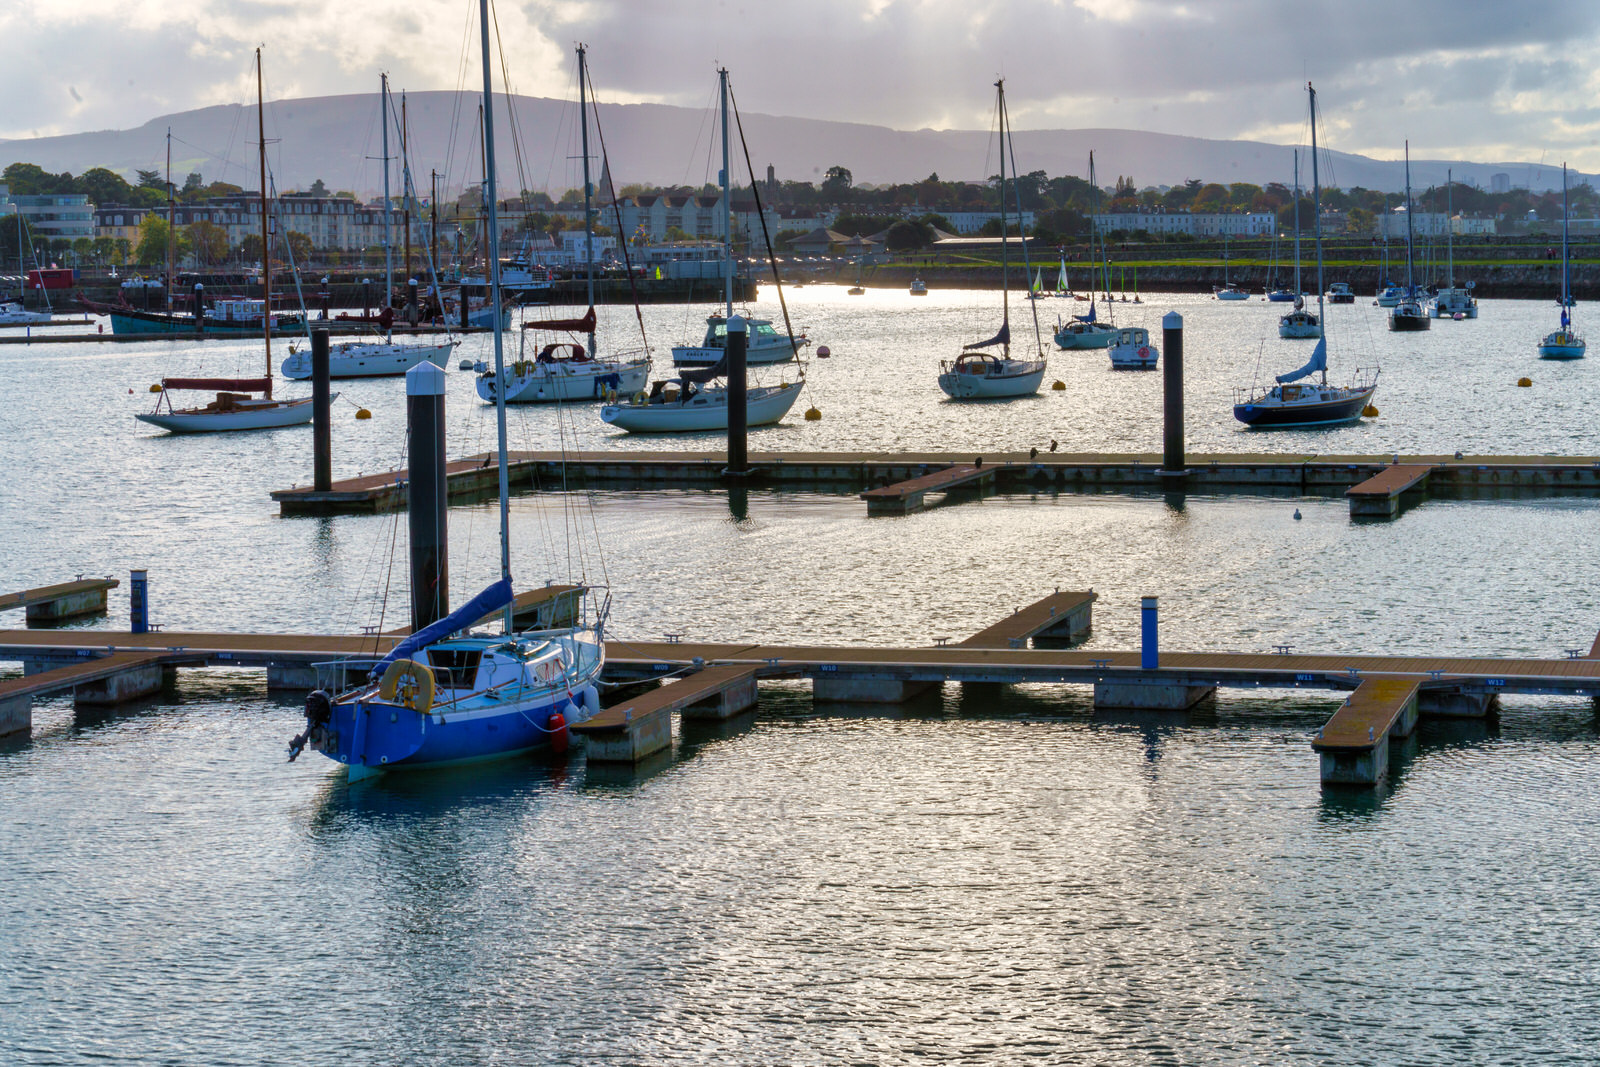 THE SECTION OF THE MARINA NEAR THE WESTERN BREAKWATER [DUN LAOGHAIRE HARBOUR]
 006